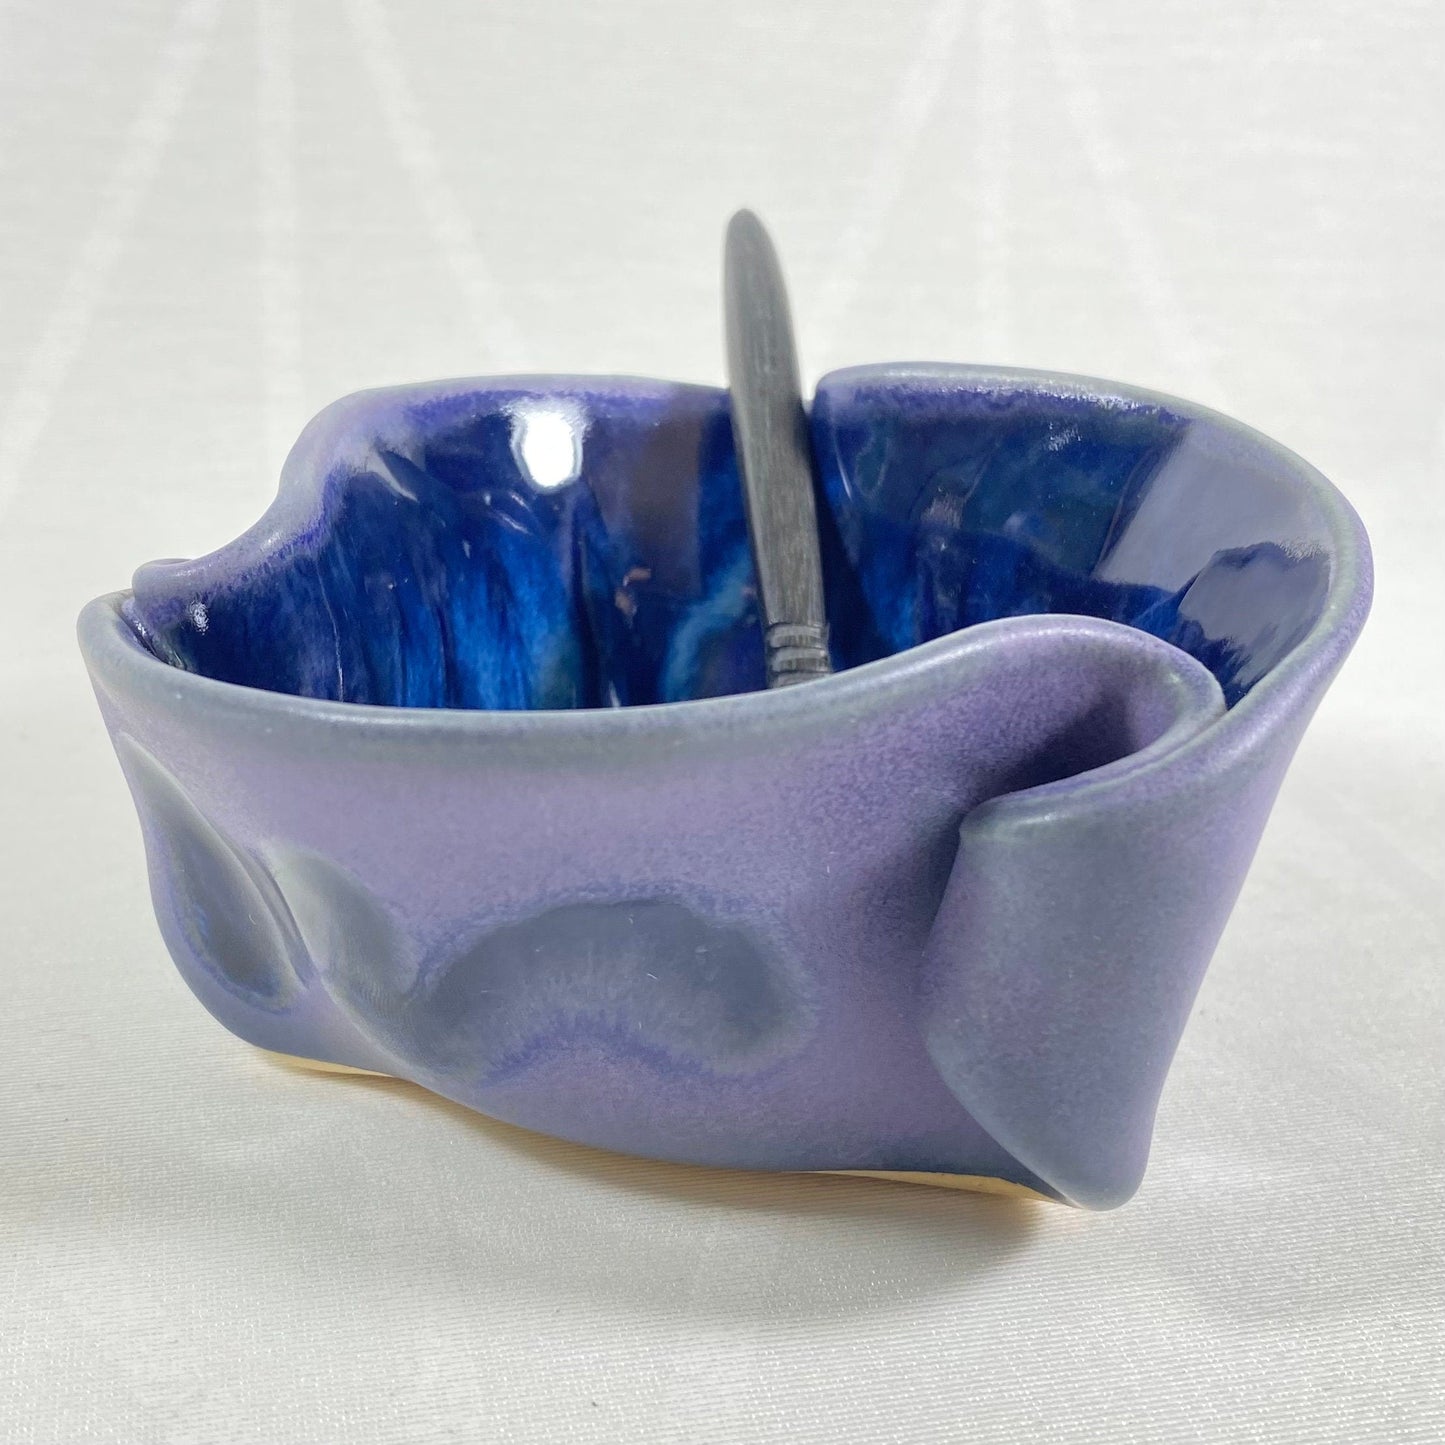 Handmade Purple and Blue Pot/Dish with Serving Spoon, Functional and Decorative Pottery